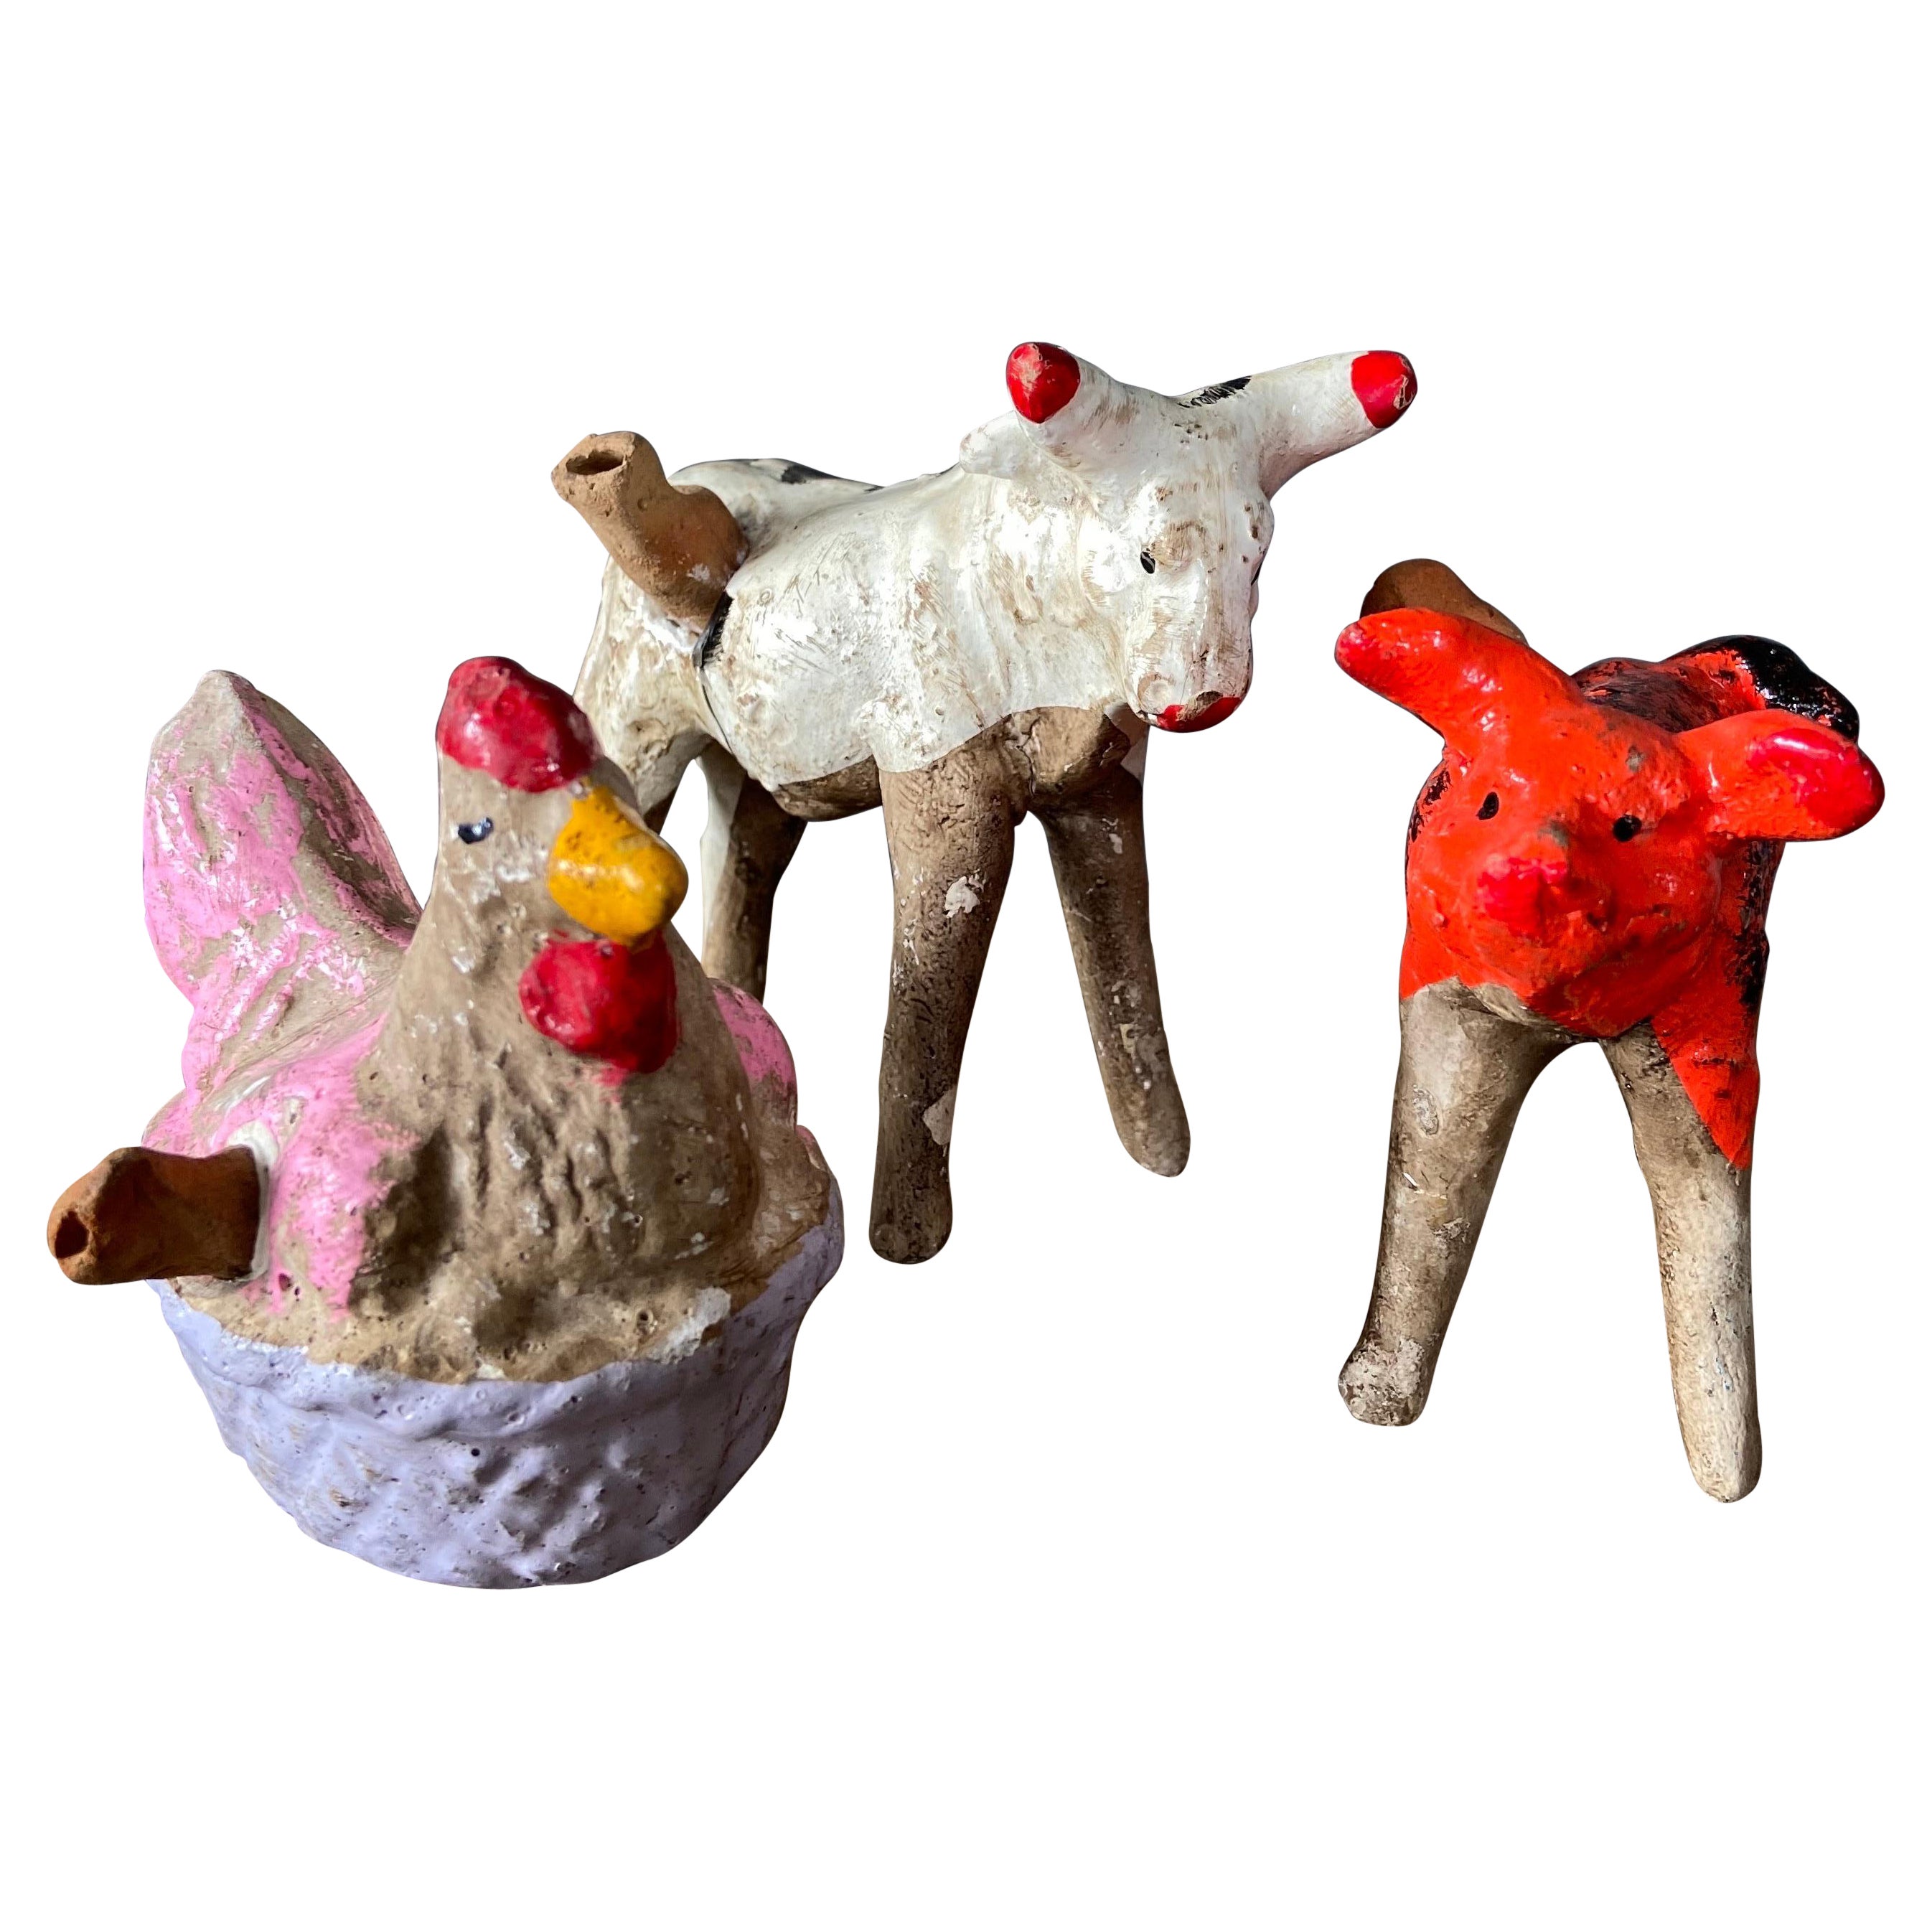 Set of 3 Ceramic Animal Figures from Mexico, Circa 1980s and 1990s